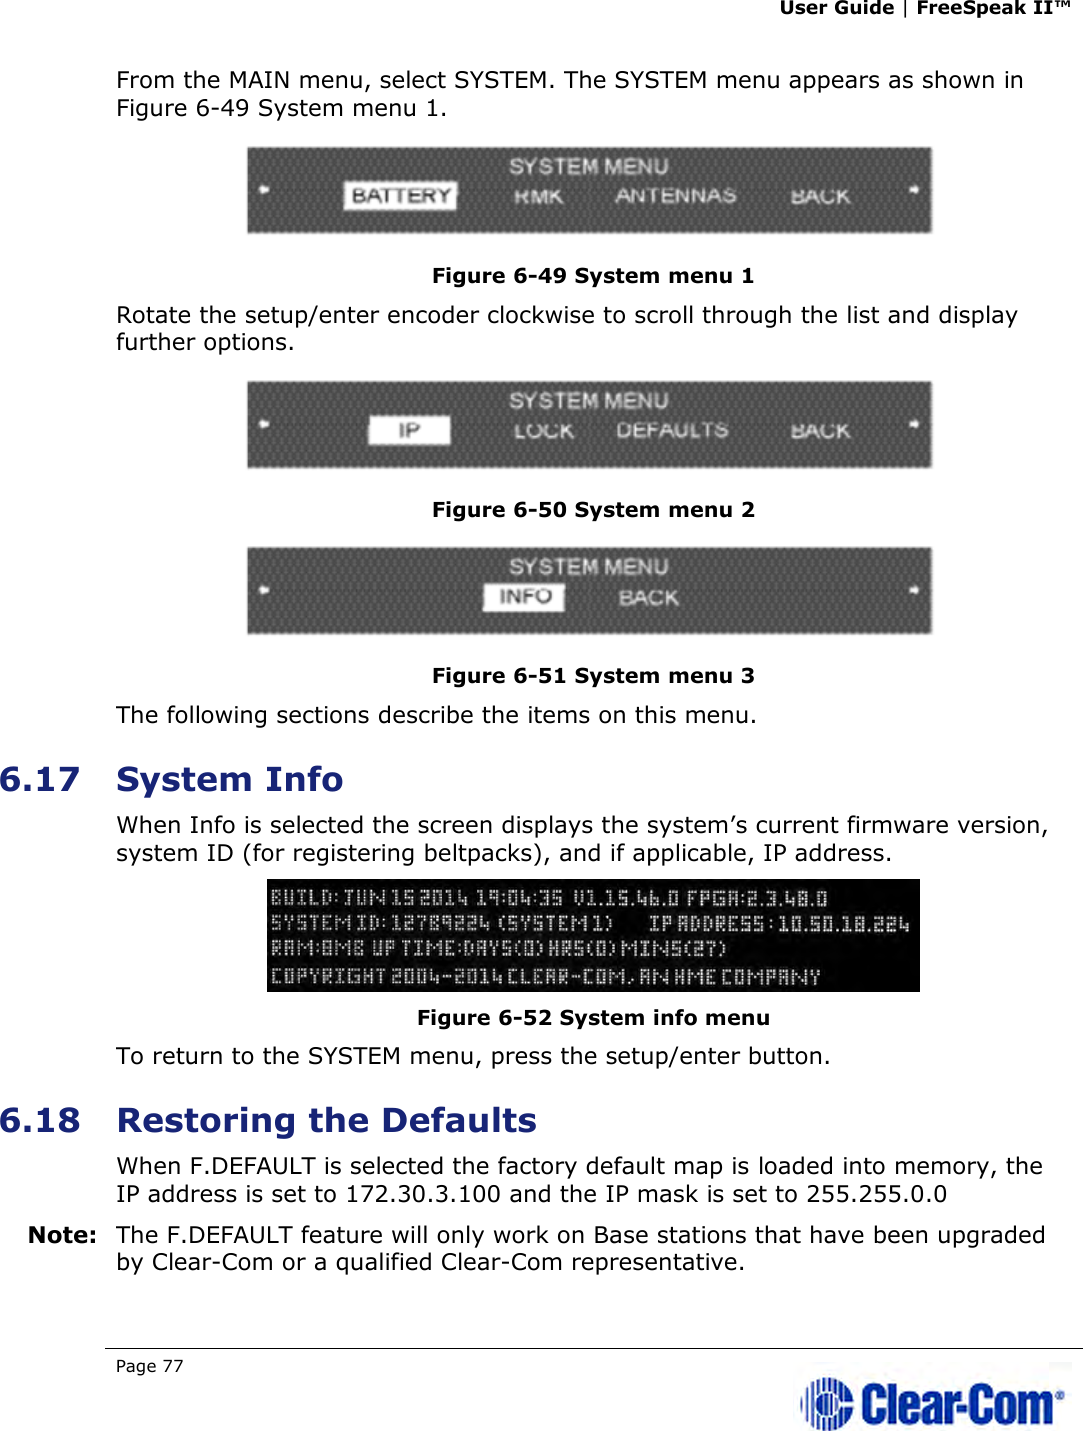 User Guide | FreeSpeak II™  Page 77   From the MAIN menu, select SYSTEM. The SYSTEM menu appears as shown in Figure 6-49 System menu 1.  Figure 6-49 System menu 1 Rotate the setup/enter encoder clockwise to scroll through the list and display further options.  Figure 6-50 System menu 2  Figure 6-51 System menu 3 The following sections describe the items on this menu.  6.17 System Info When Info is selected the screen displays the system’s current firmware version, system ID (for registering beltpacks), and if applicable, IP address.  Figure 6-52 System info menu To return to the SYSTEM menu, press the setup/enter button.  6.18 Restoring the Defaults When F.DEFAULT is selected the factory default map is loaded into memory, the IP address is set to 172.30.3.100 and the IP mask is set to 255.255.0.0 Note: The F.DEFAULT feature will only work on Base stations that have been upgraded by Clear-Com or a qualified Clear-Com representative. 